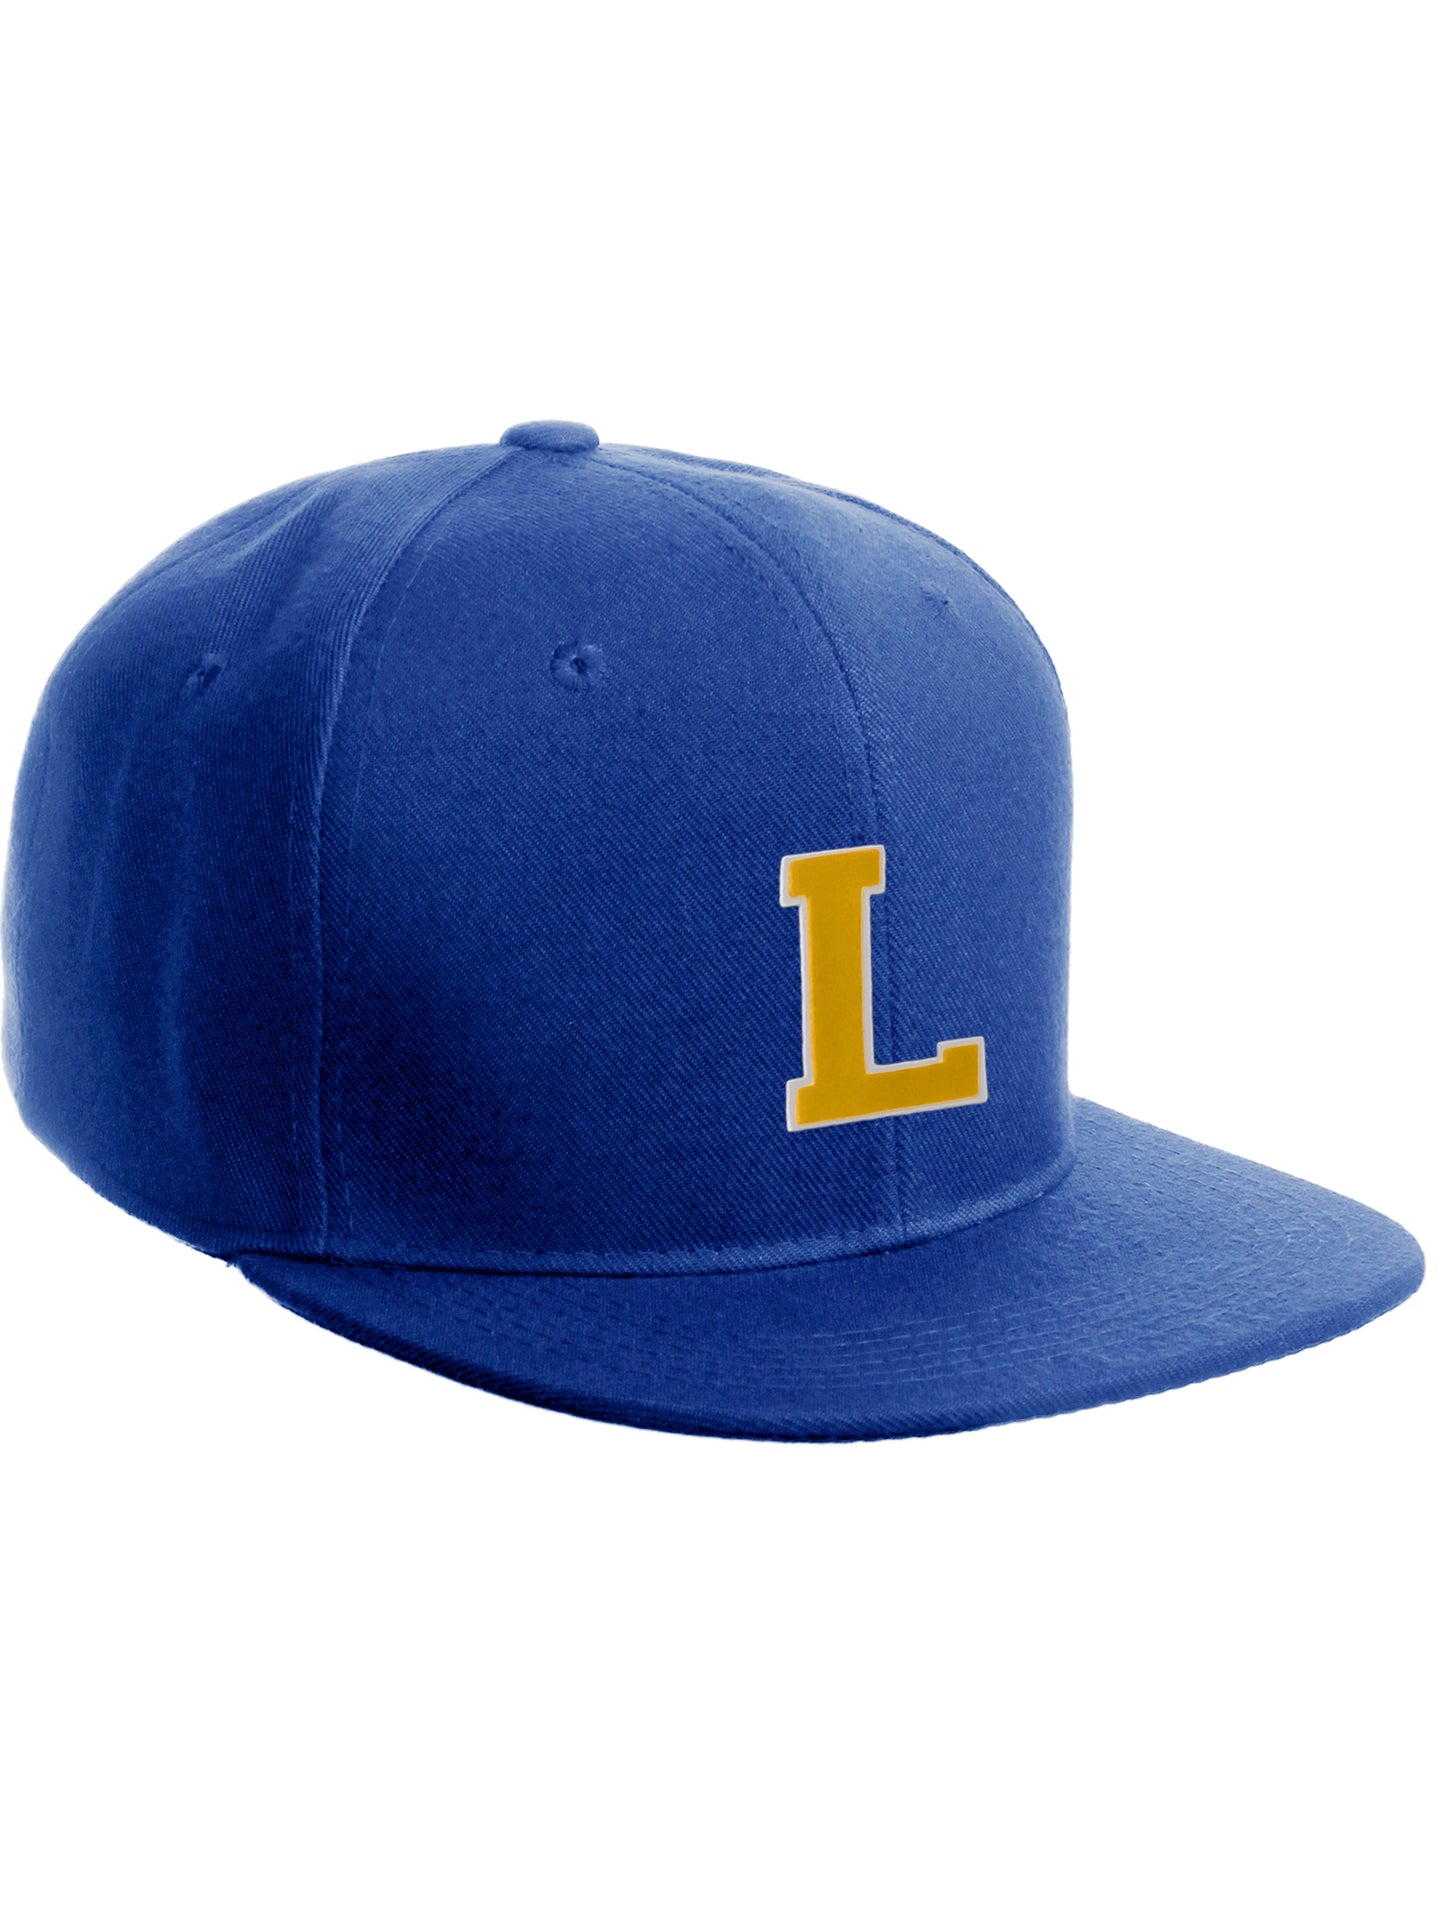 Classic Snapback Hat Custom A to Z Initial Raised Letter, Royal Cap White Gold